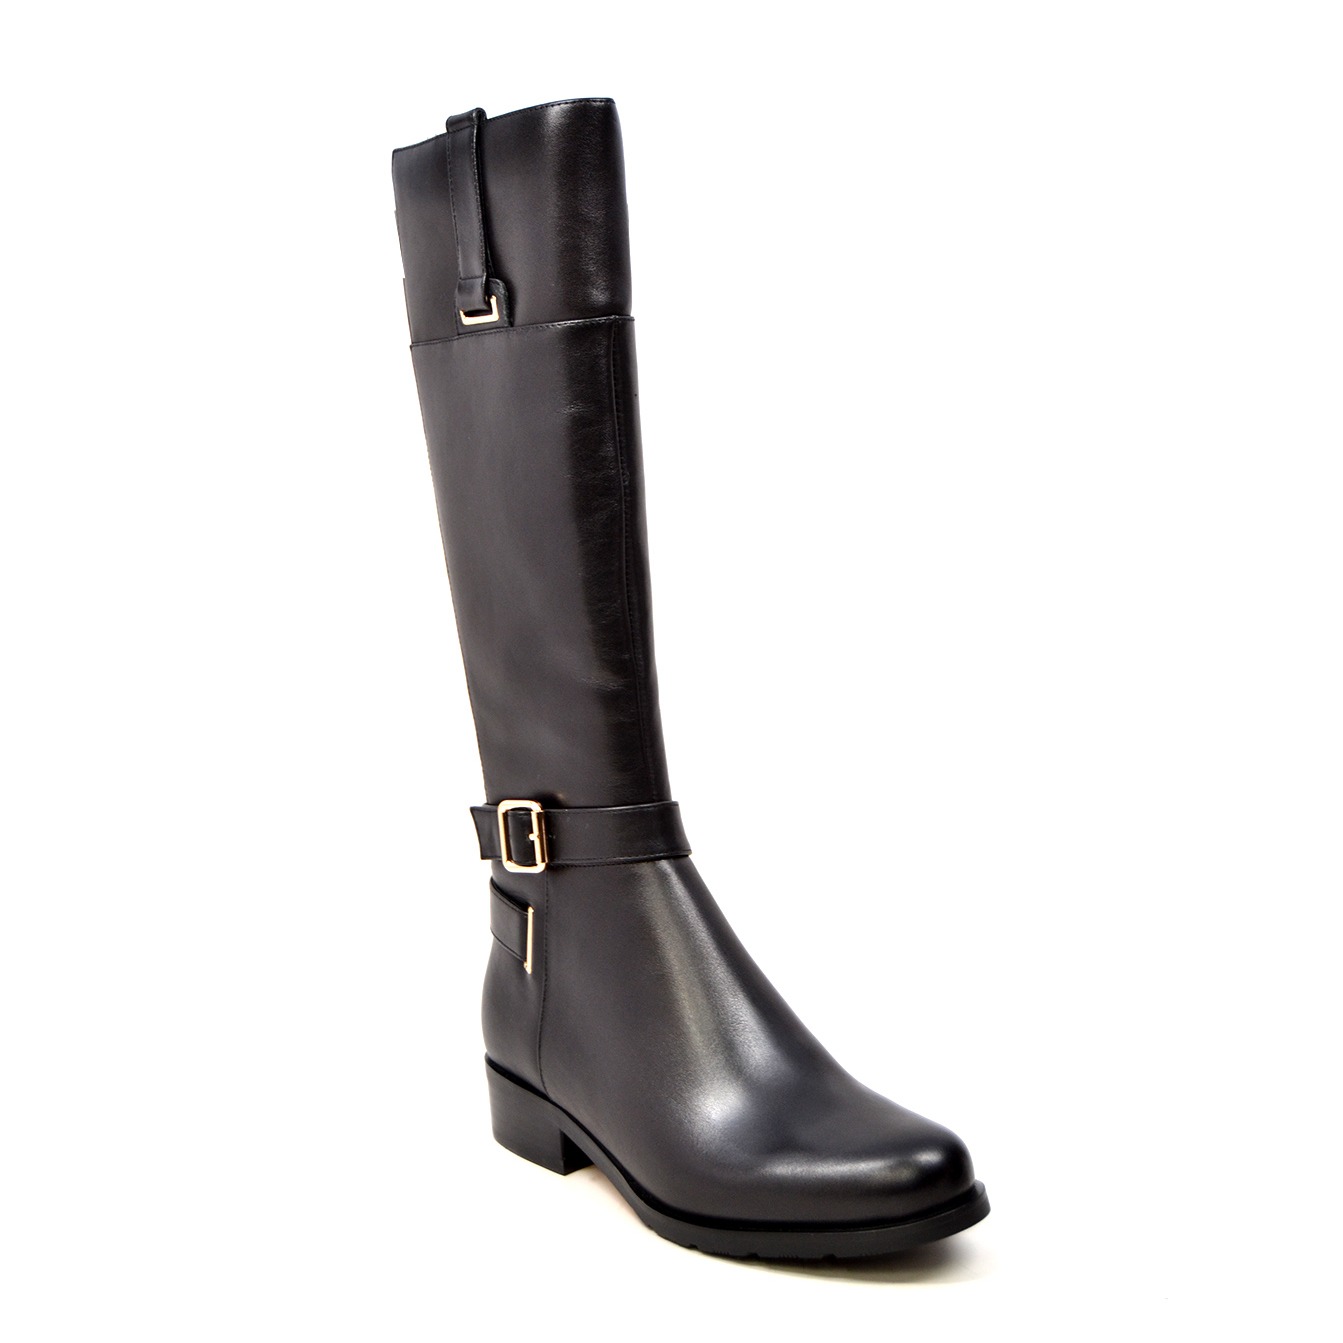 Solemani Women's Chastity Casual Slim calf Leather Riding Boot 